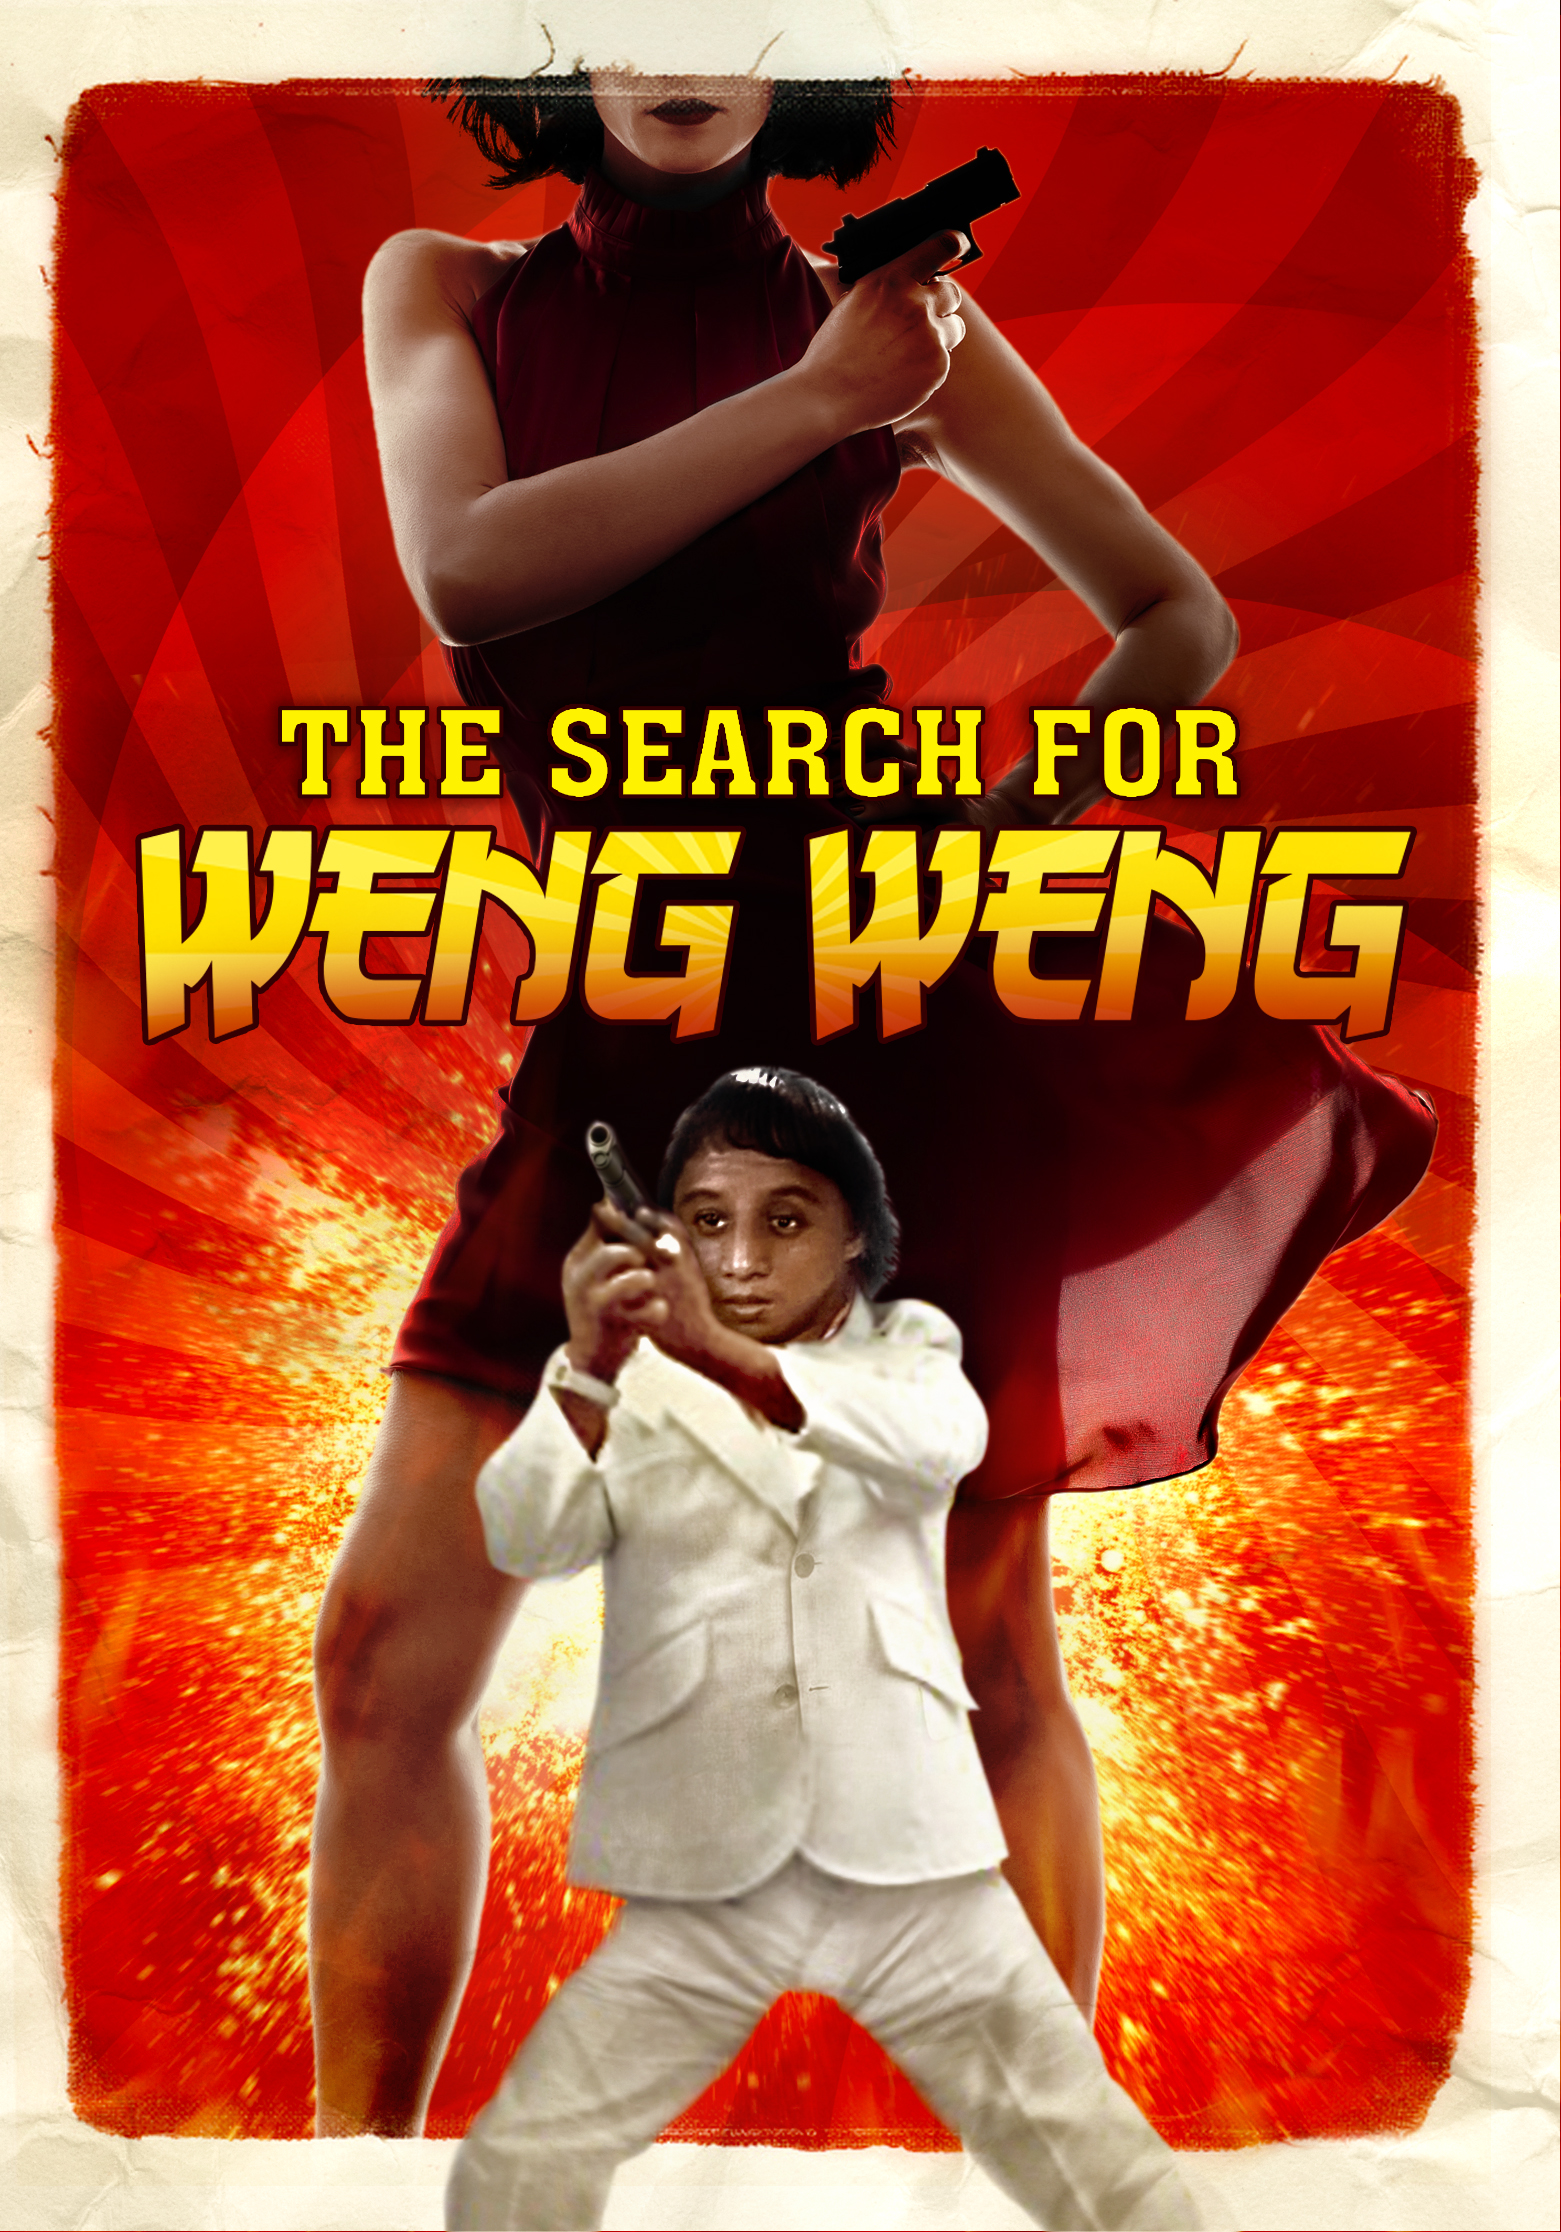 The Search for Weng Weng (2007) Screenshot 1